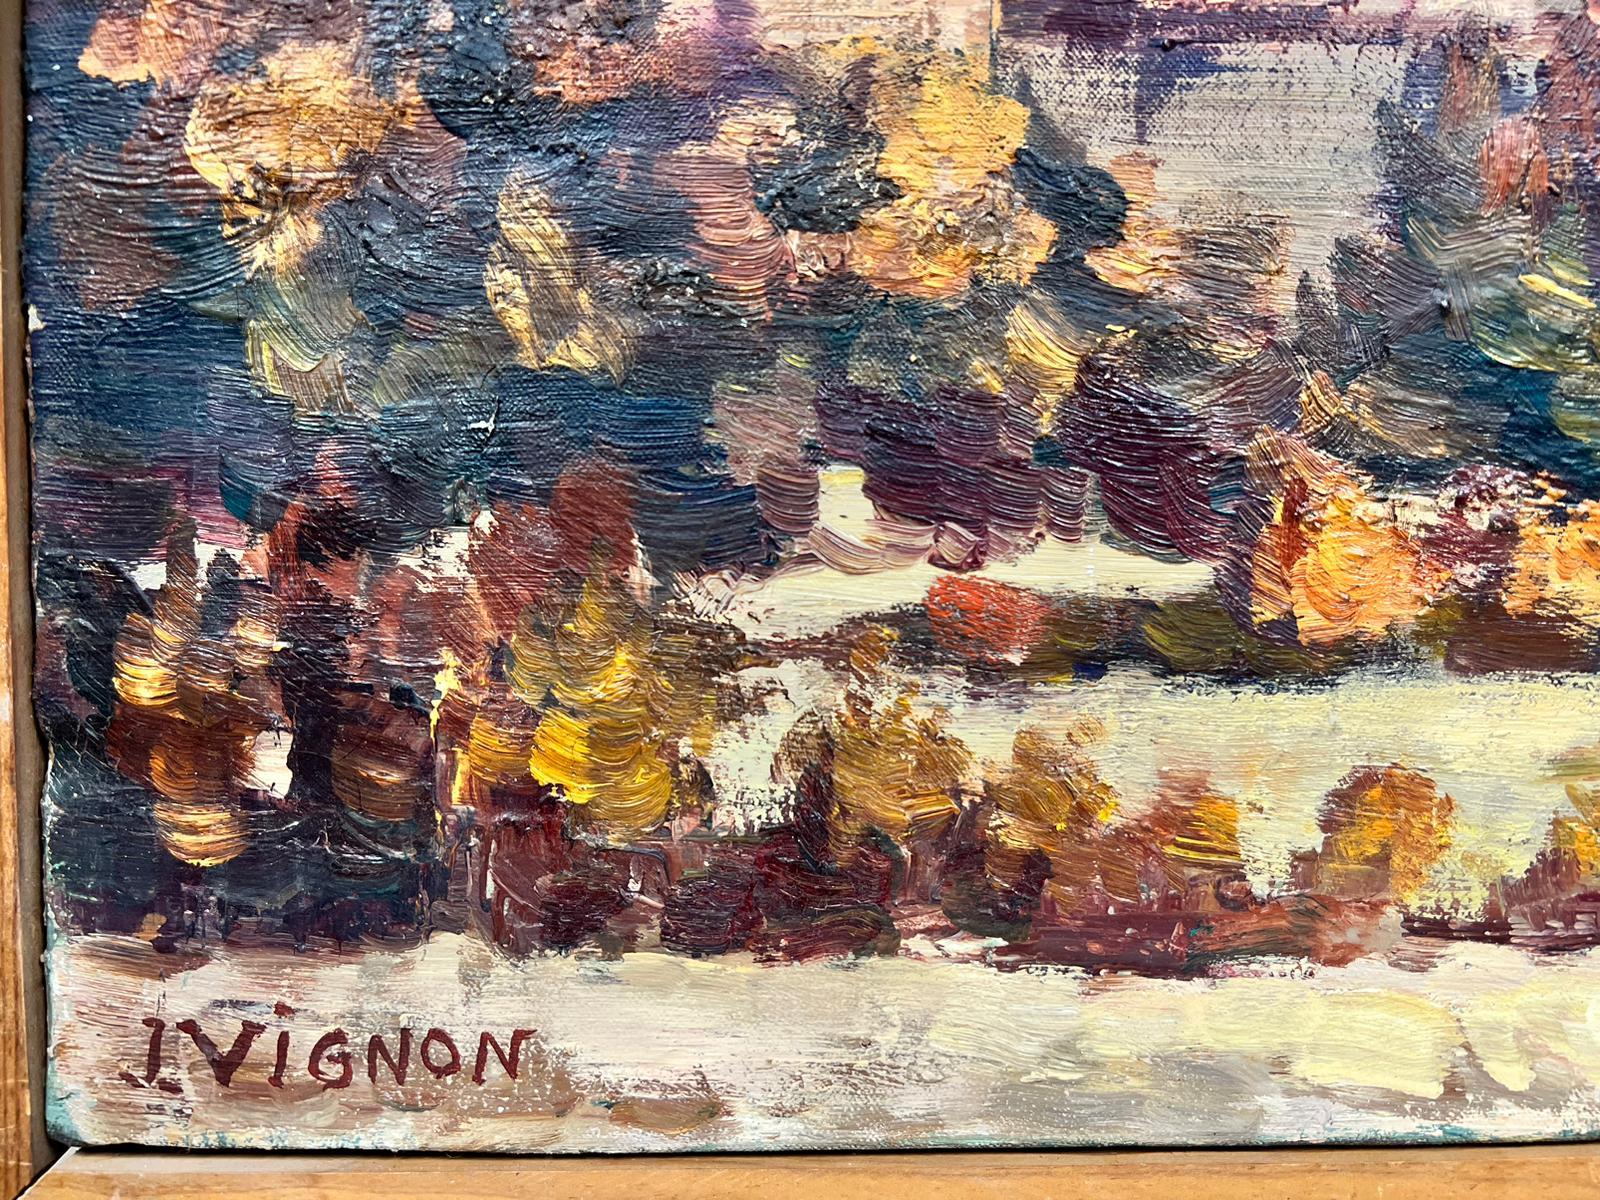 Catalan Landscape
by Josine Vignon (French 1922-2022)
signed 
oil painting on canvas, in a wooden frame
painting: 26 x 37 inches
canvas: 25 x 36 inches

Colors: Red colors, yellow, orange, white and cream

Very good condition

Provenance: from the